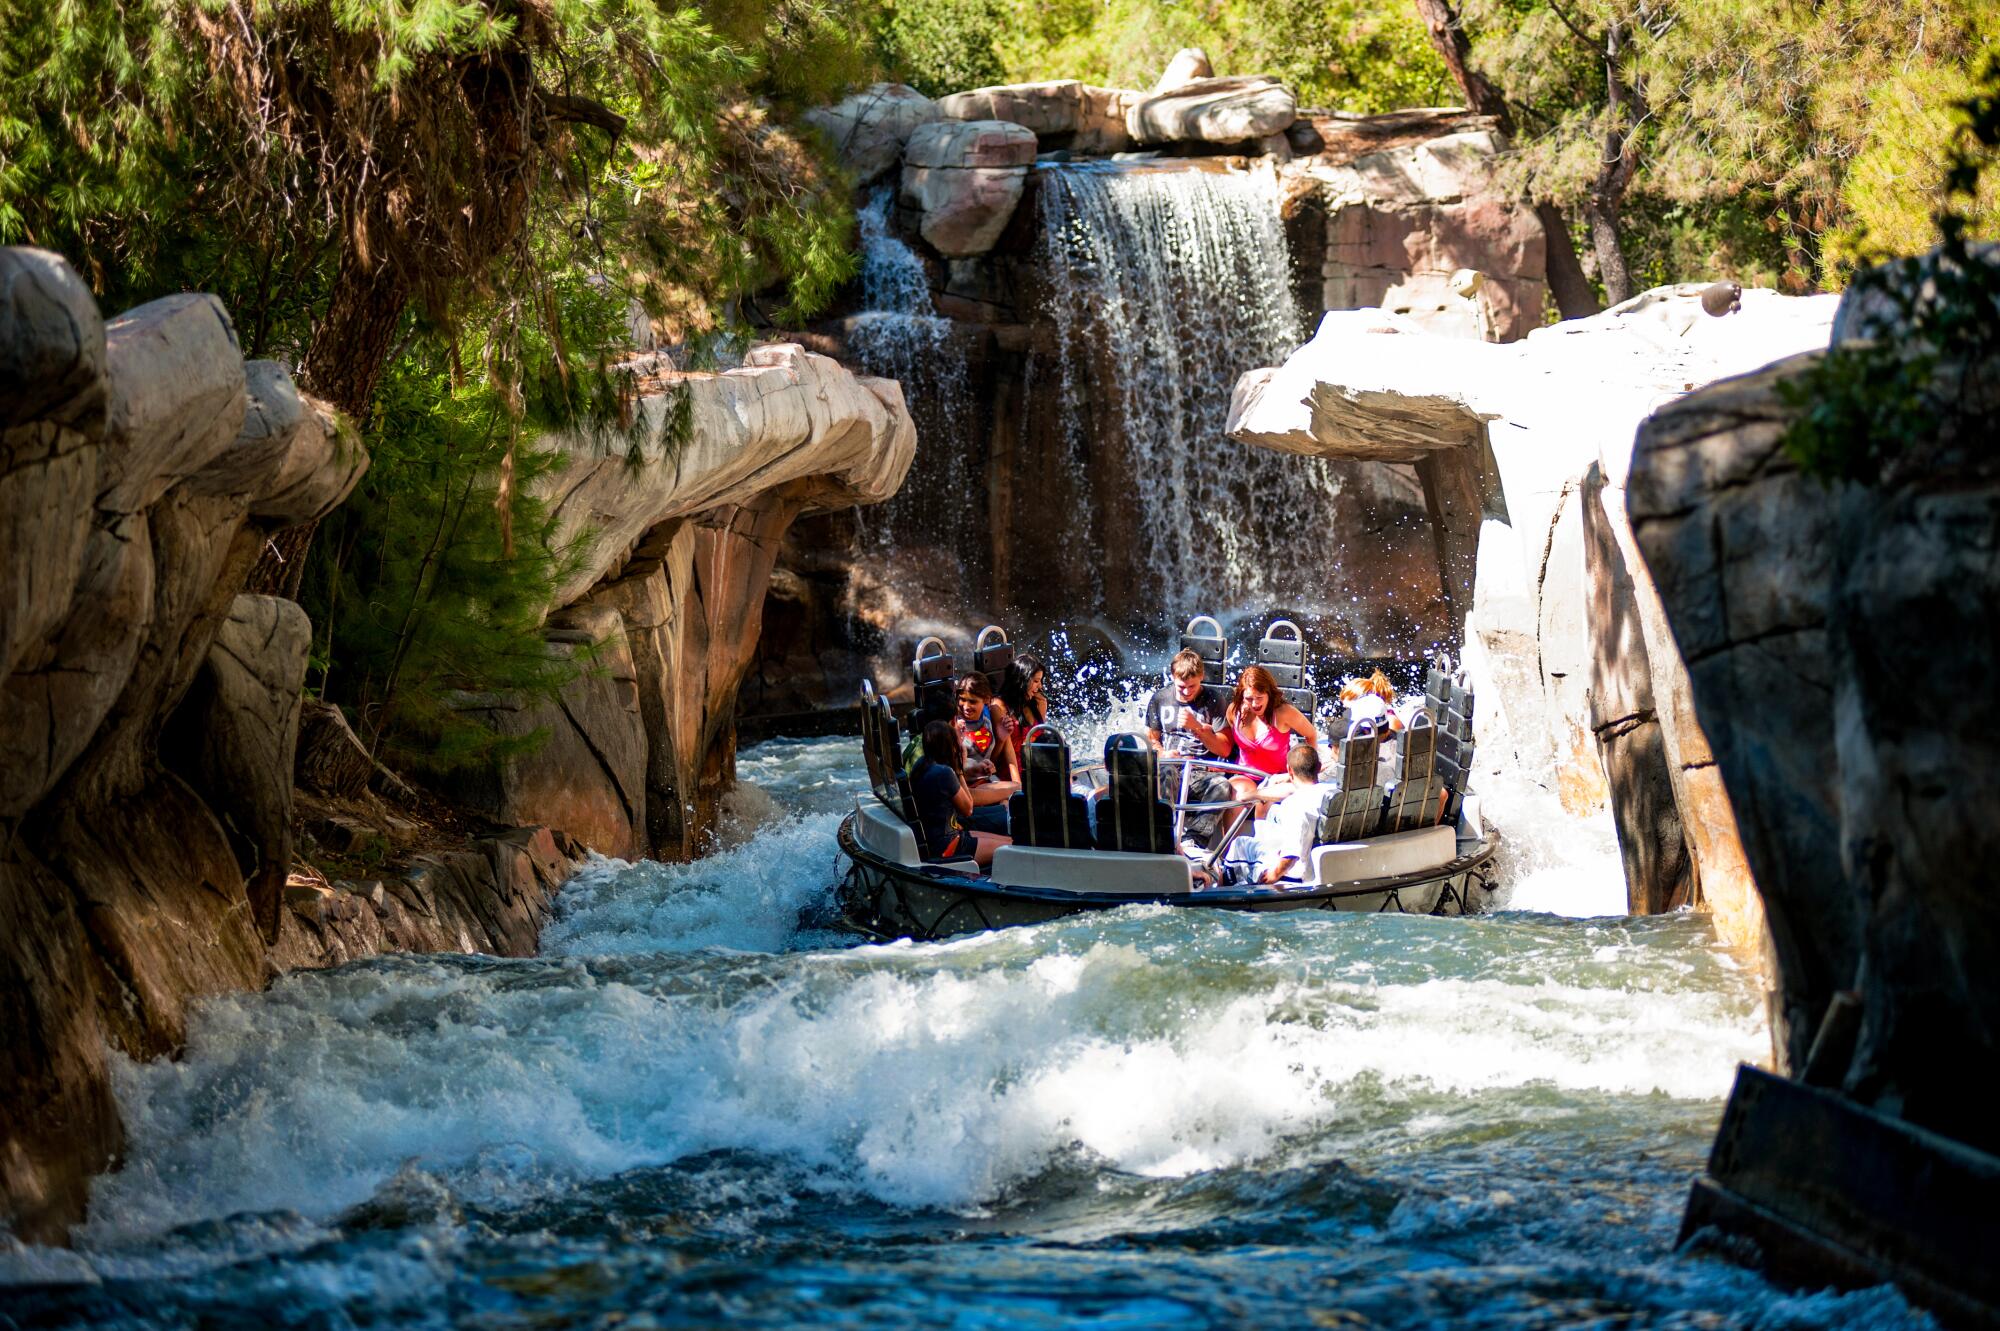 A boat full of people floats in a rocky channel amid rapids at a theme park